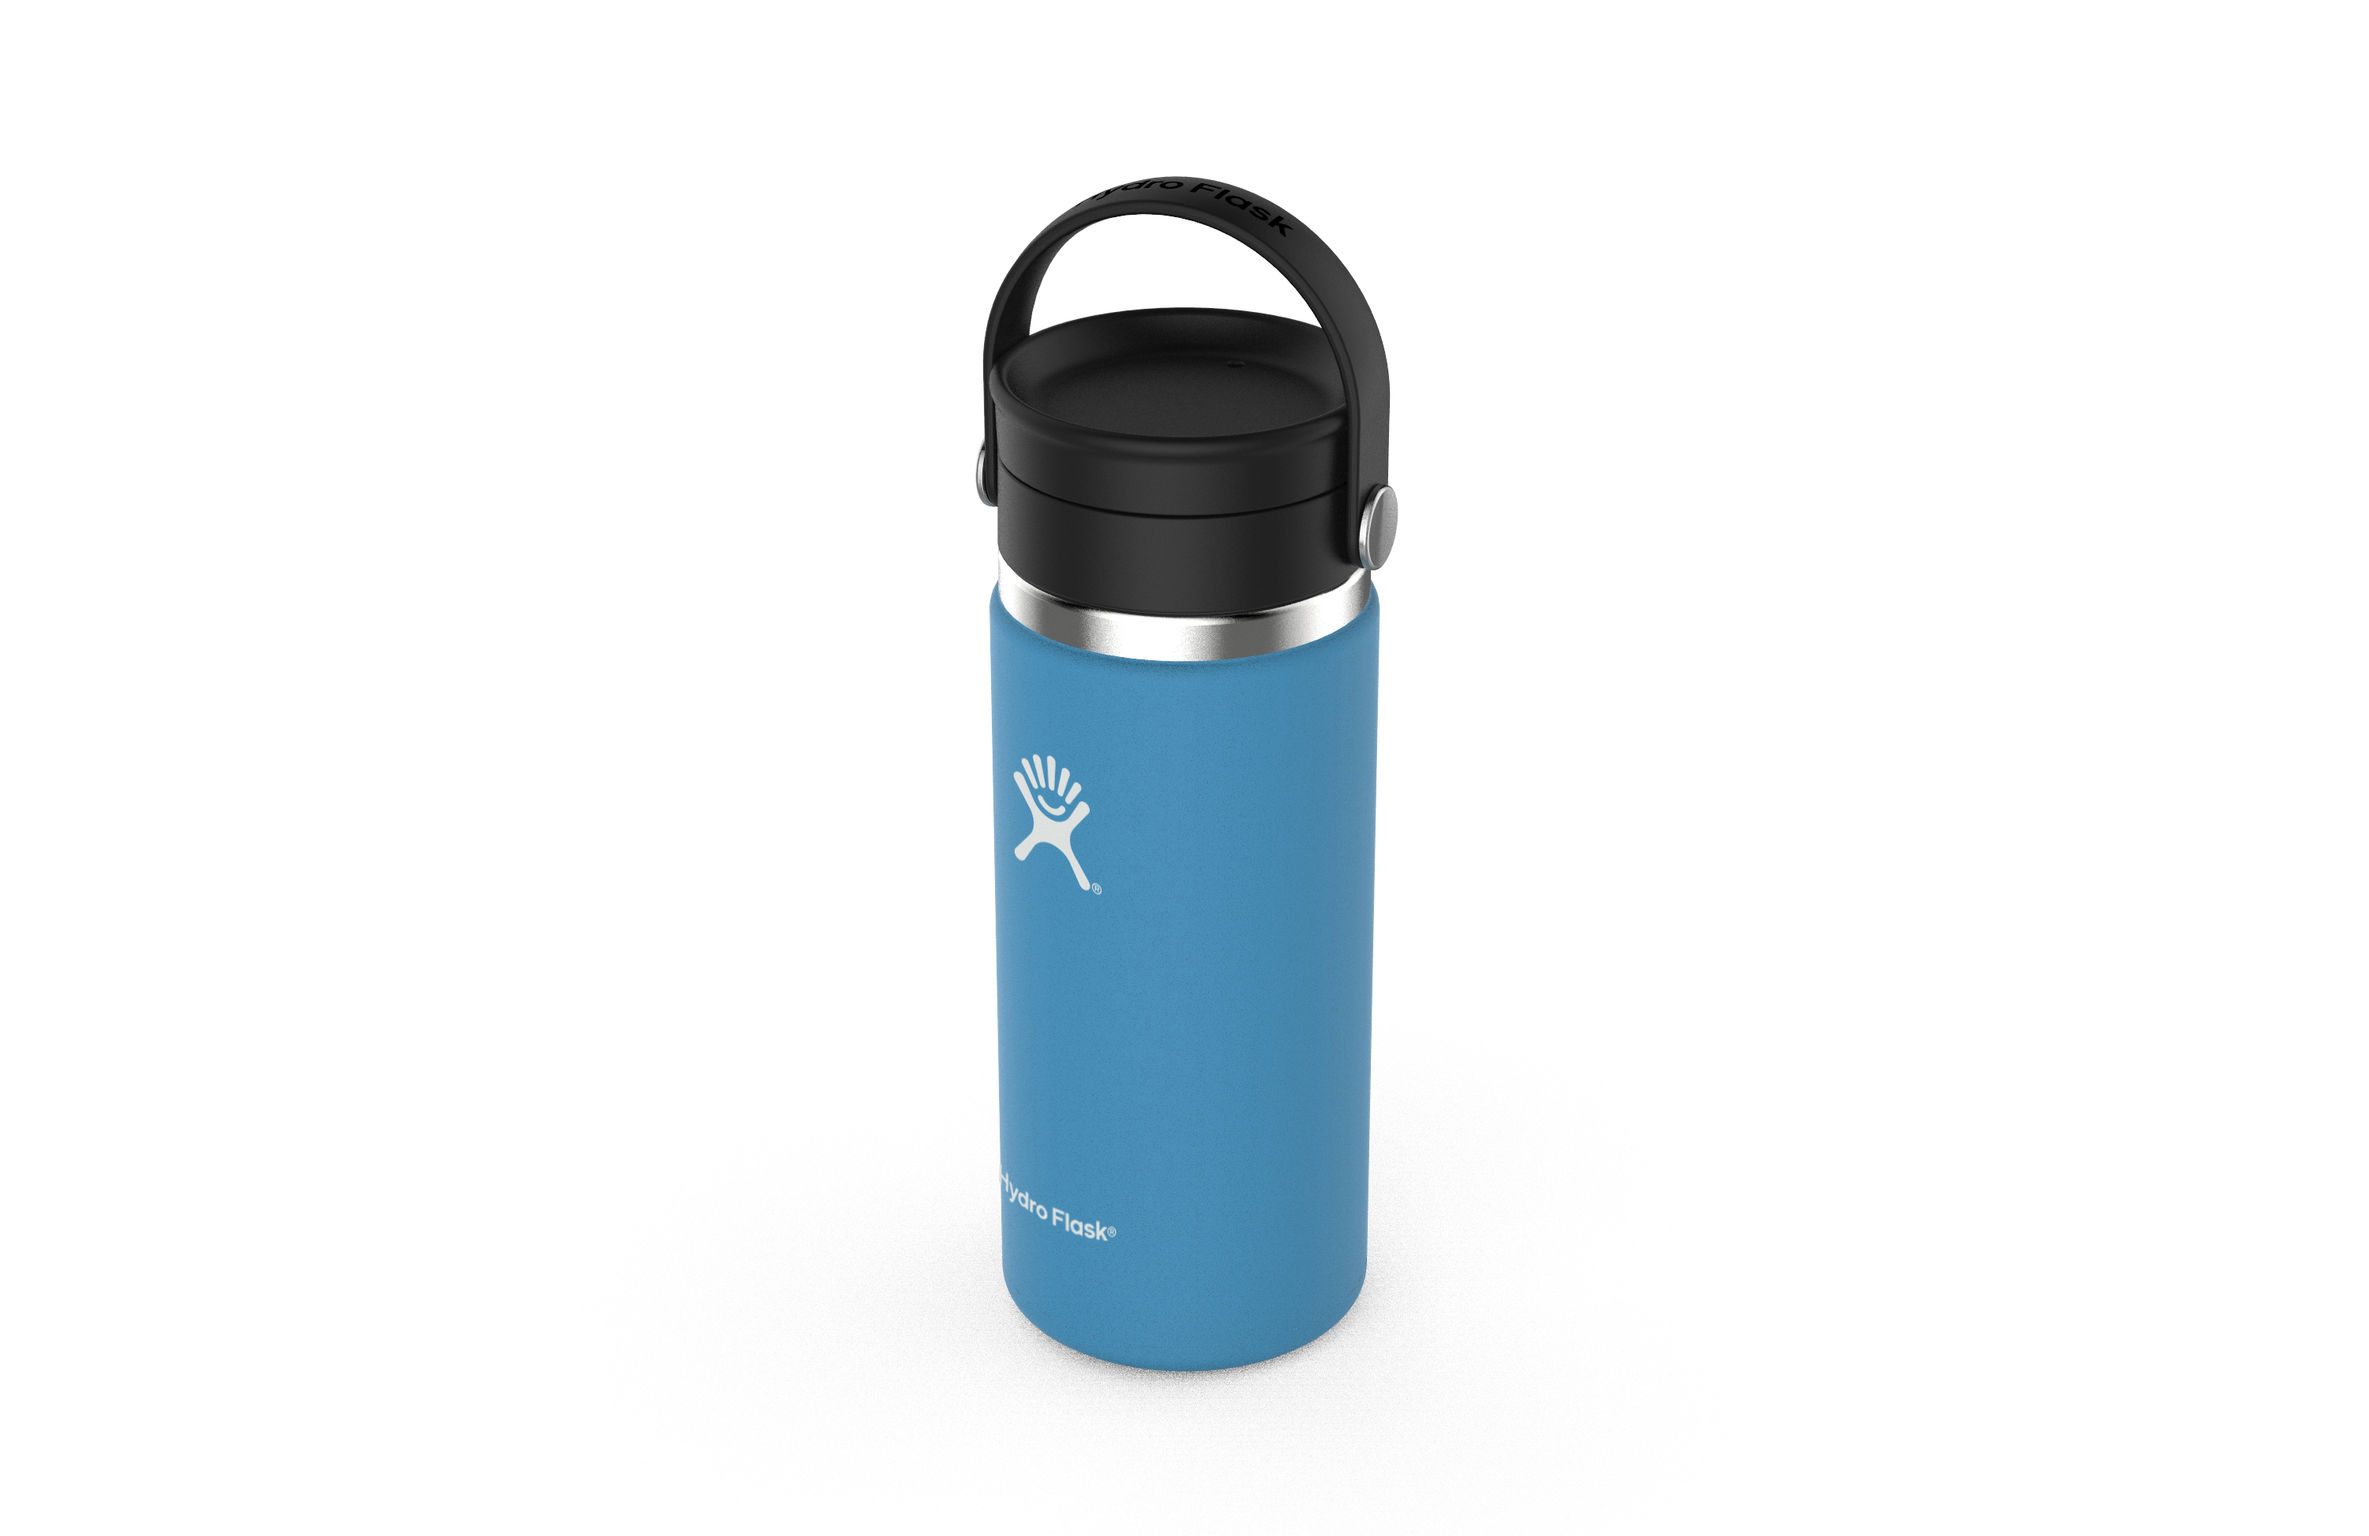 official hydro flask website